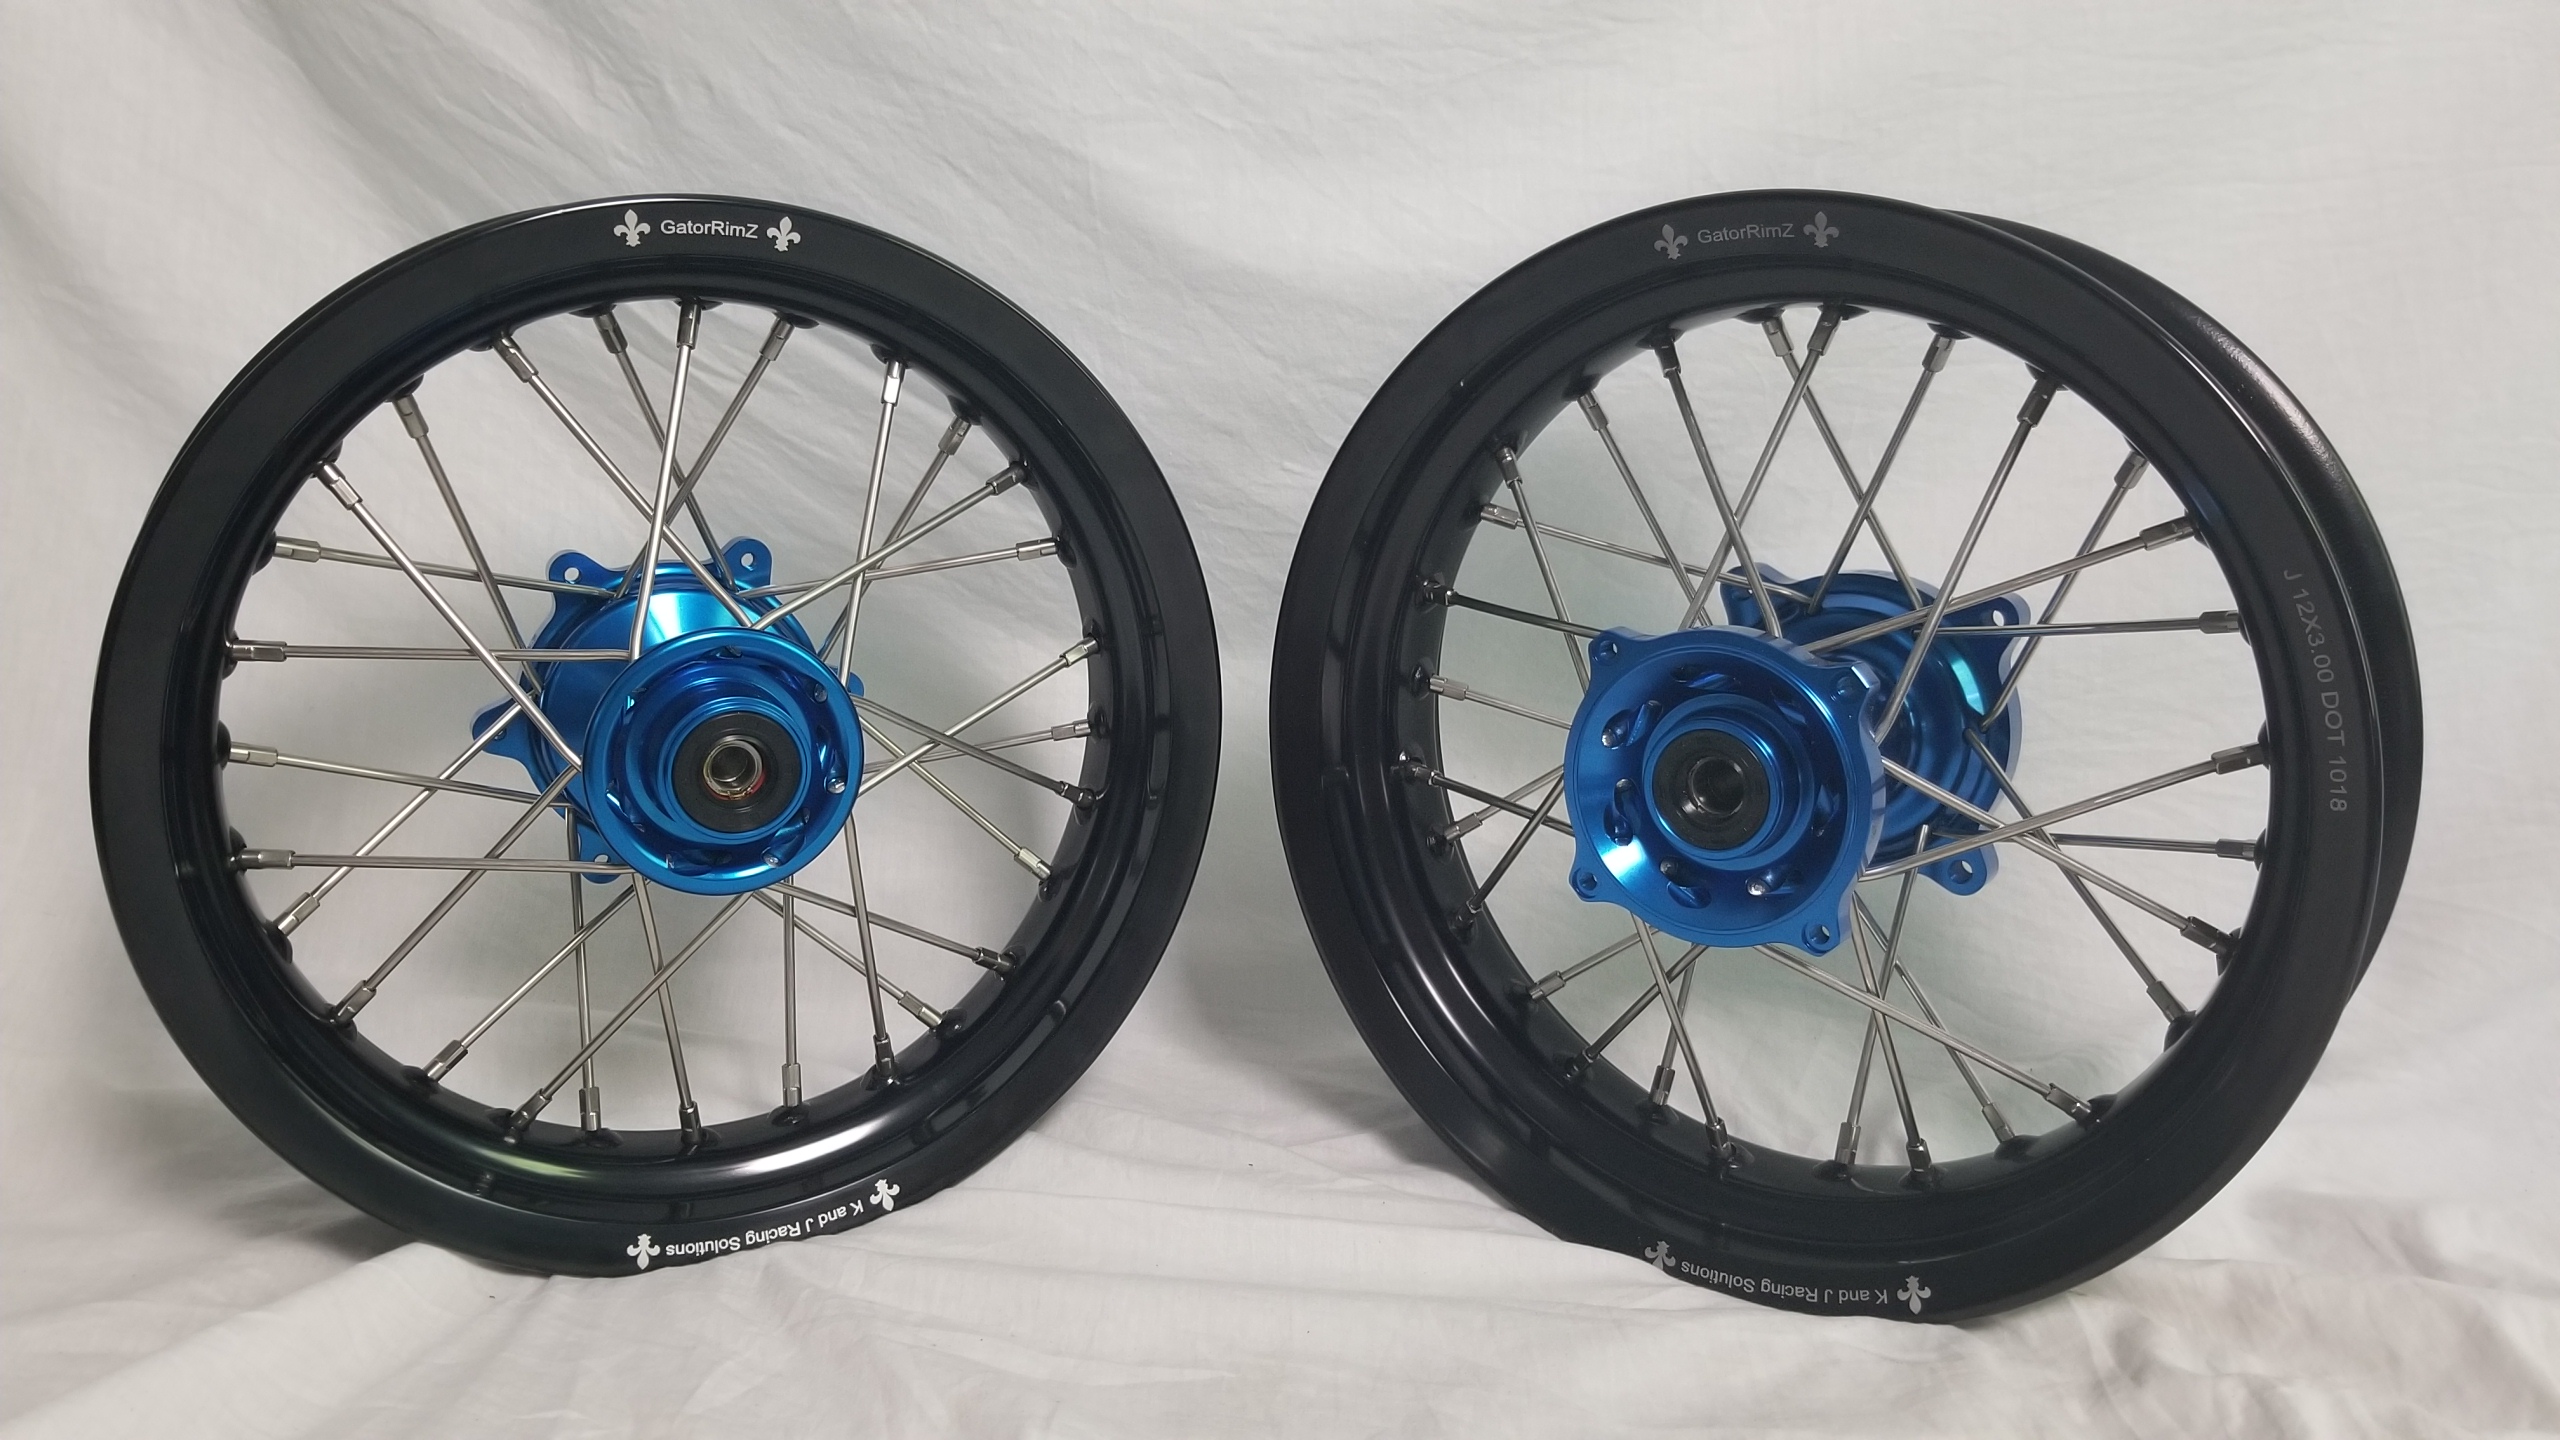 GatorRimZ KX85 Complete Wheels with Tusk Blue Hubs 12″ x 2.15″ or 